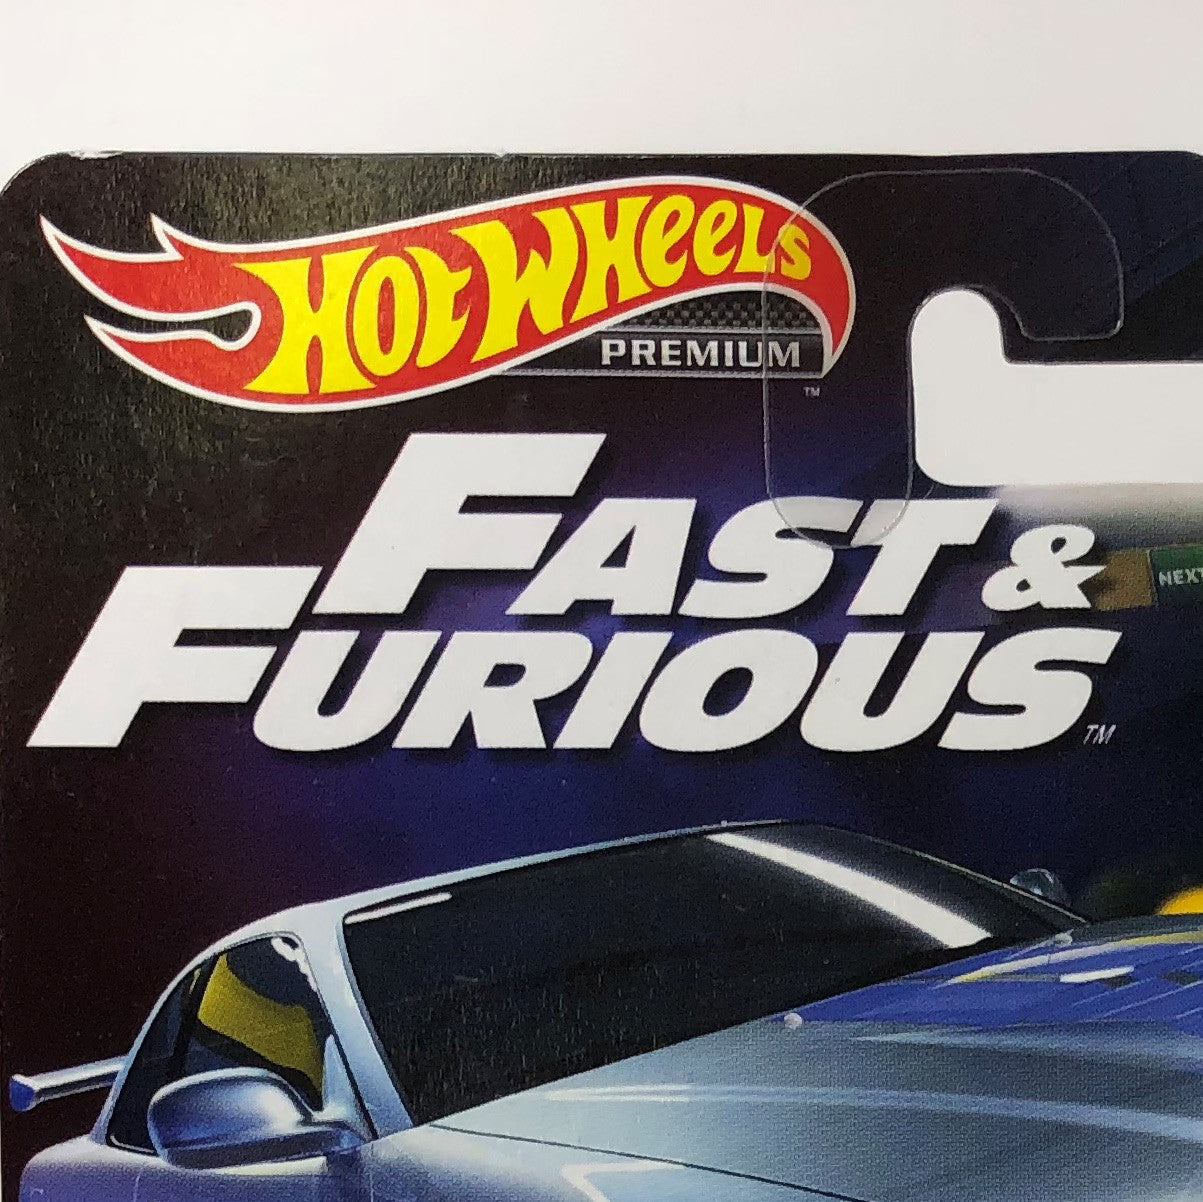 Hot Wheels Fast & Furious Set of 10 Vehicles in 1:64 Scale with 2